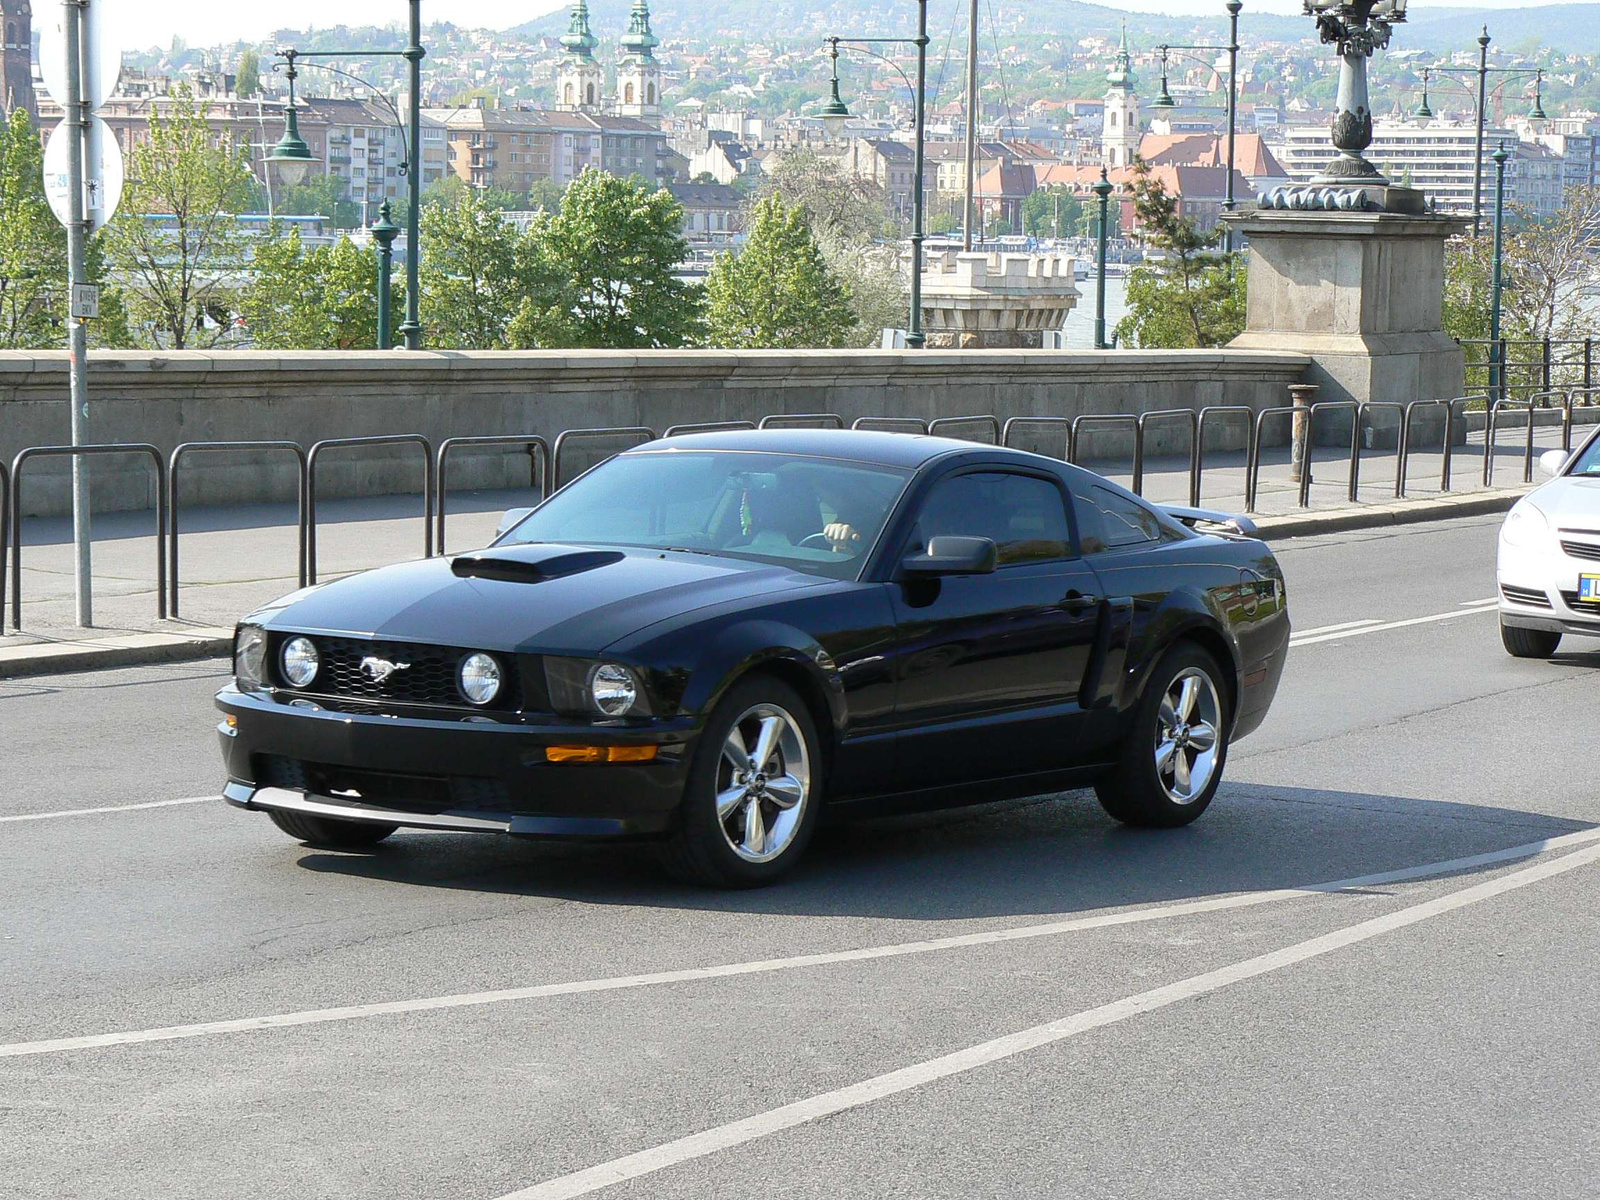 Ford Mustang 016